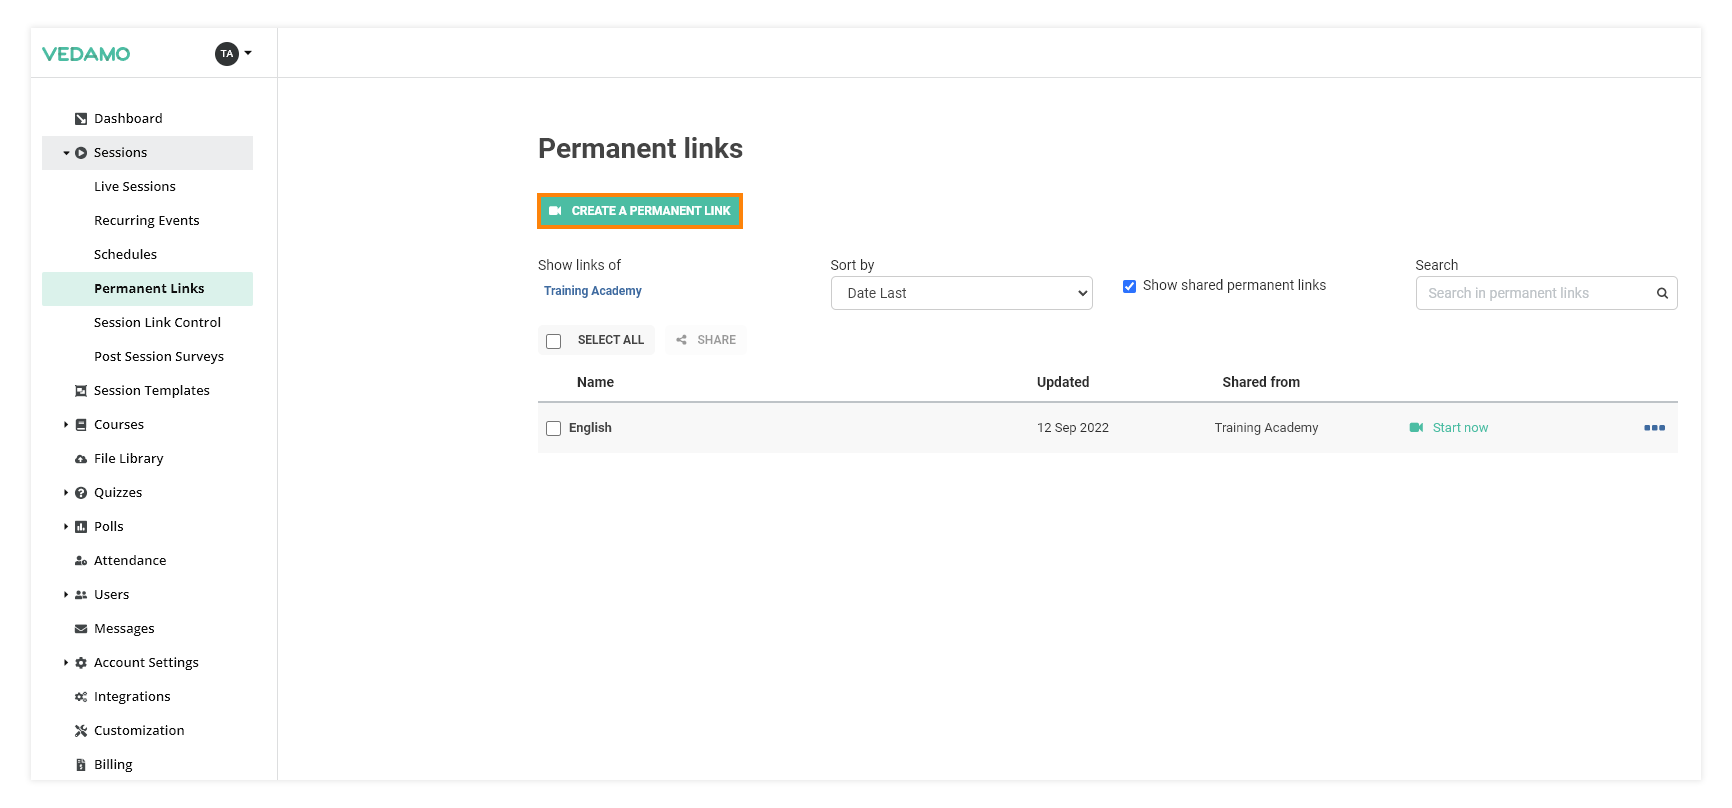 Permanent Links in the VEDAMO platform: Create a permanent link button